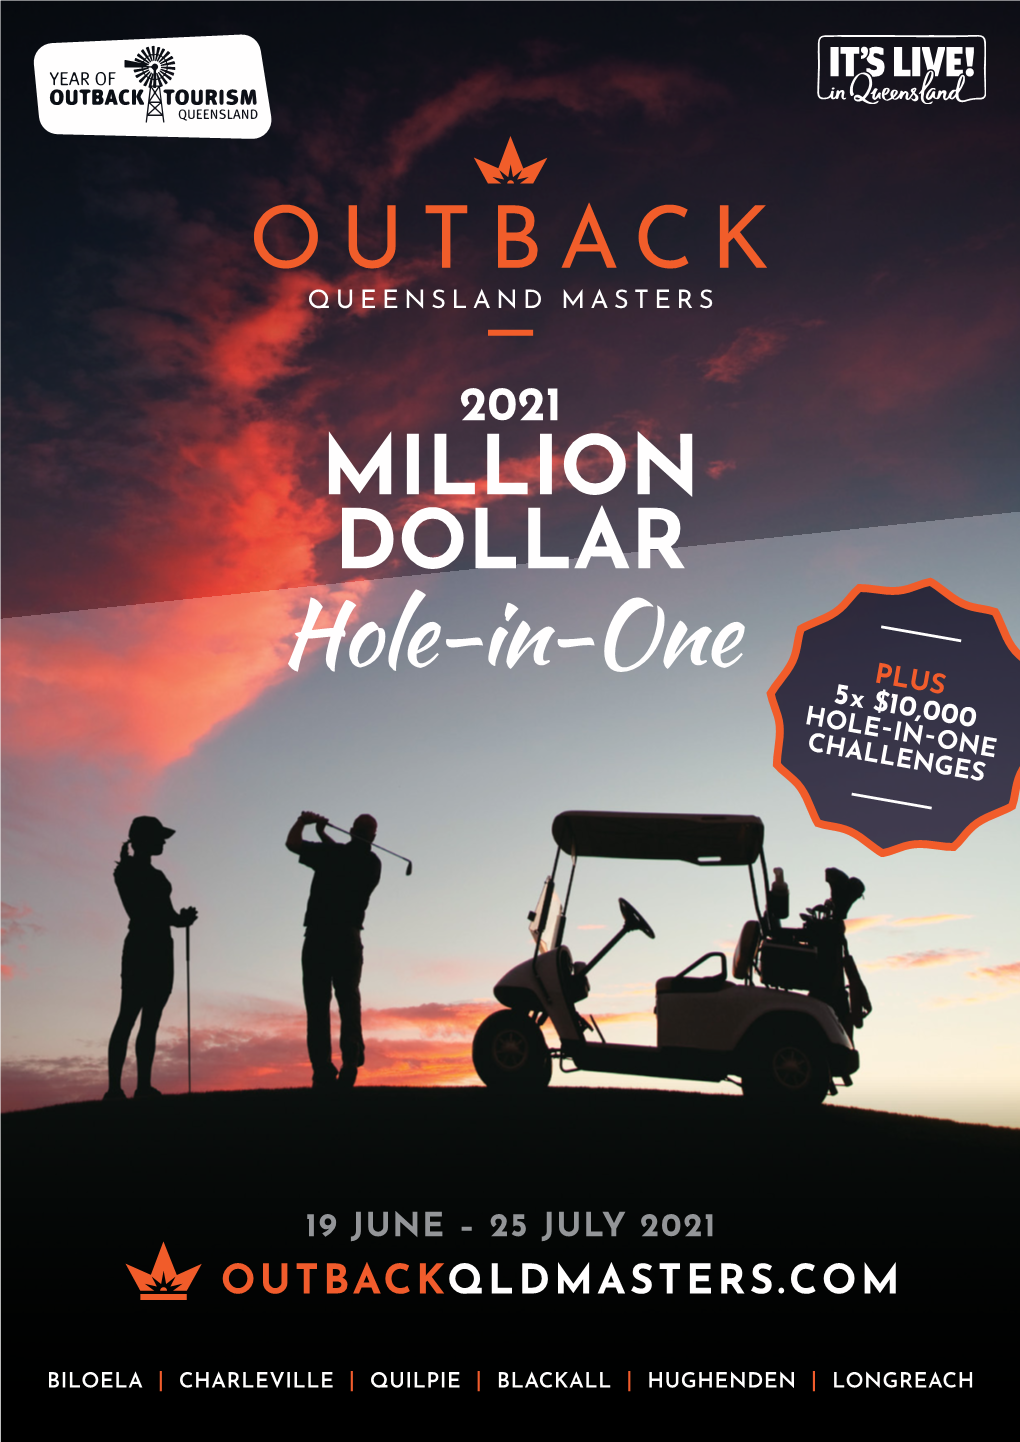 Hole-In-One PLUS 5X $10,000 HOLE– CHALLENGESIN–ONE